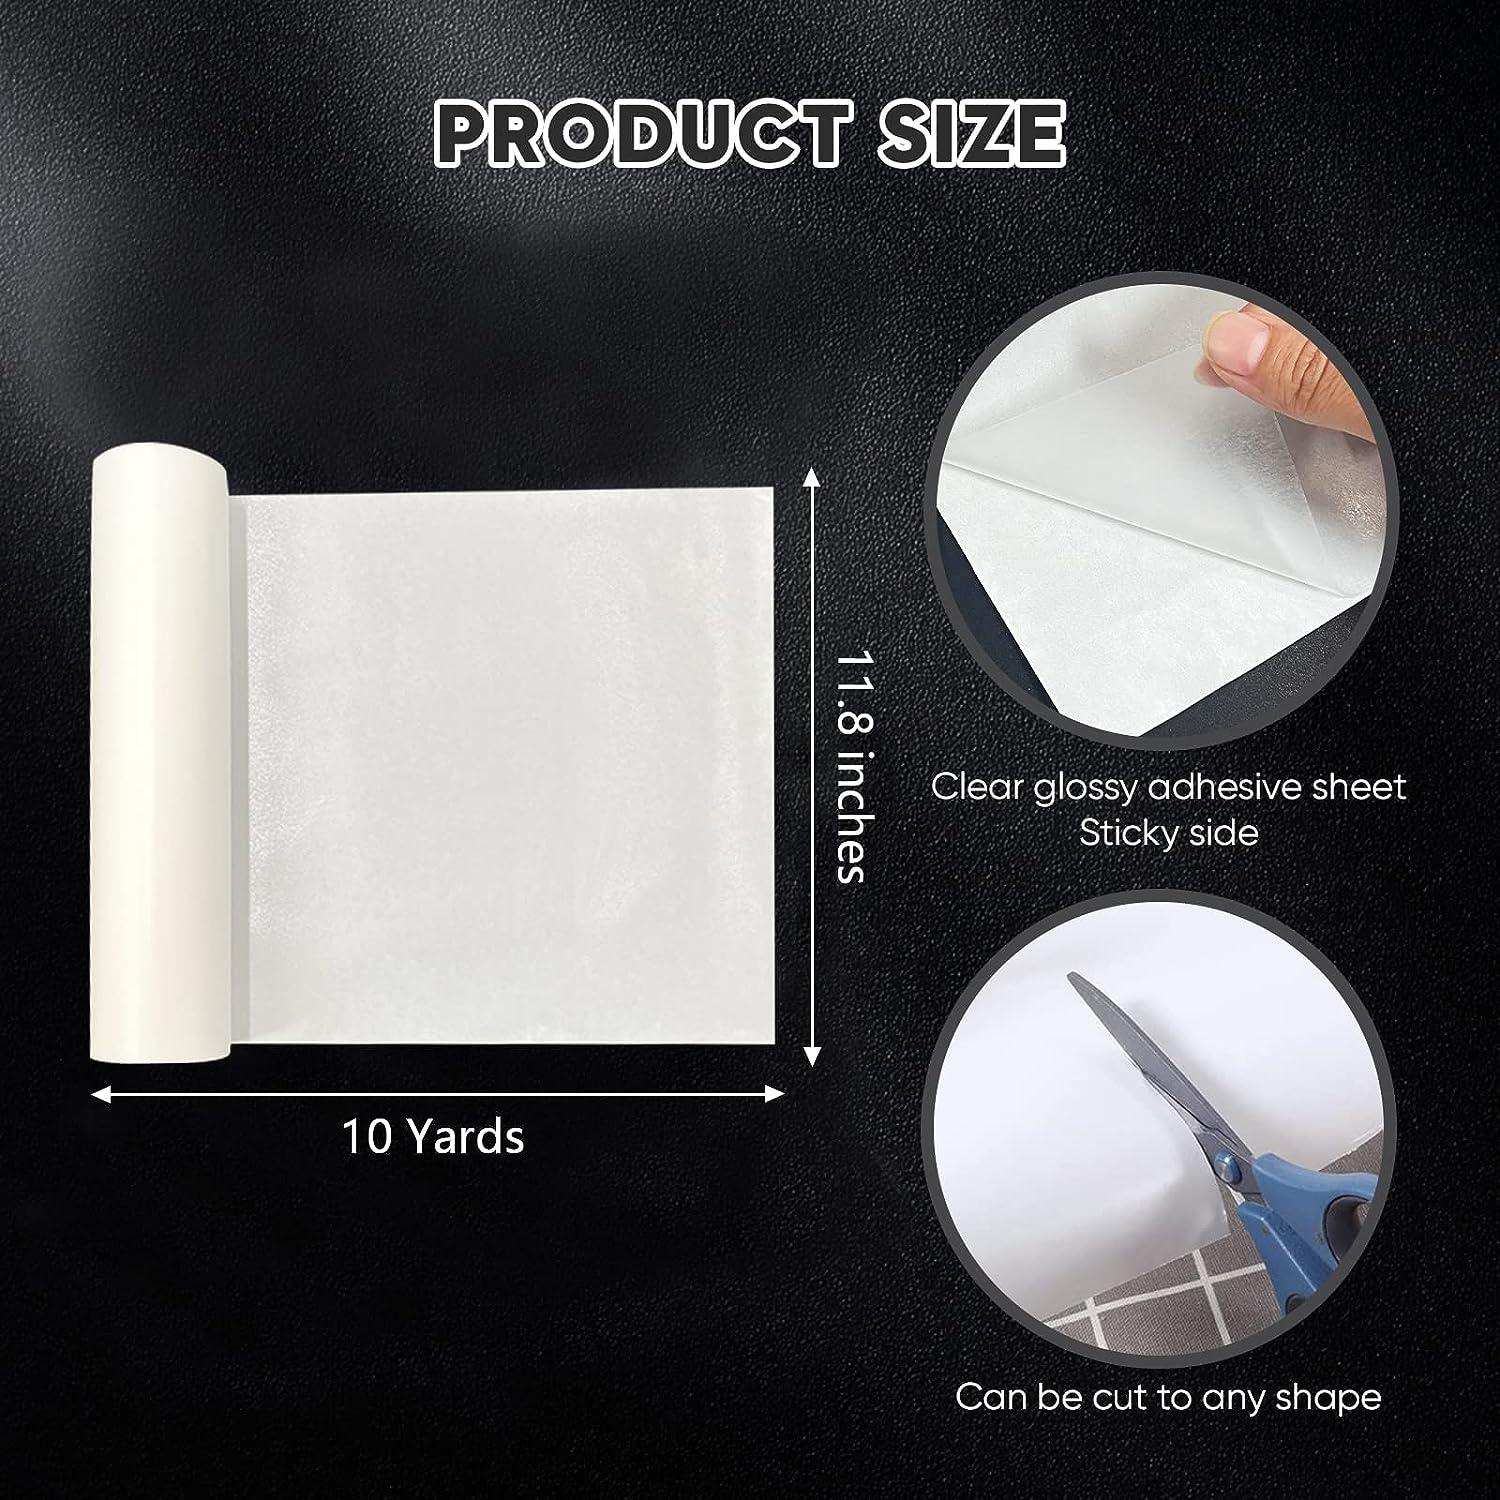 CBC 6x8 Double sided adhesive foam sheets